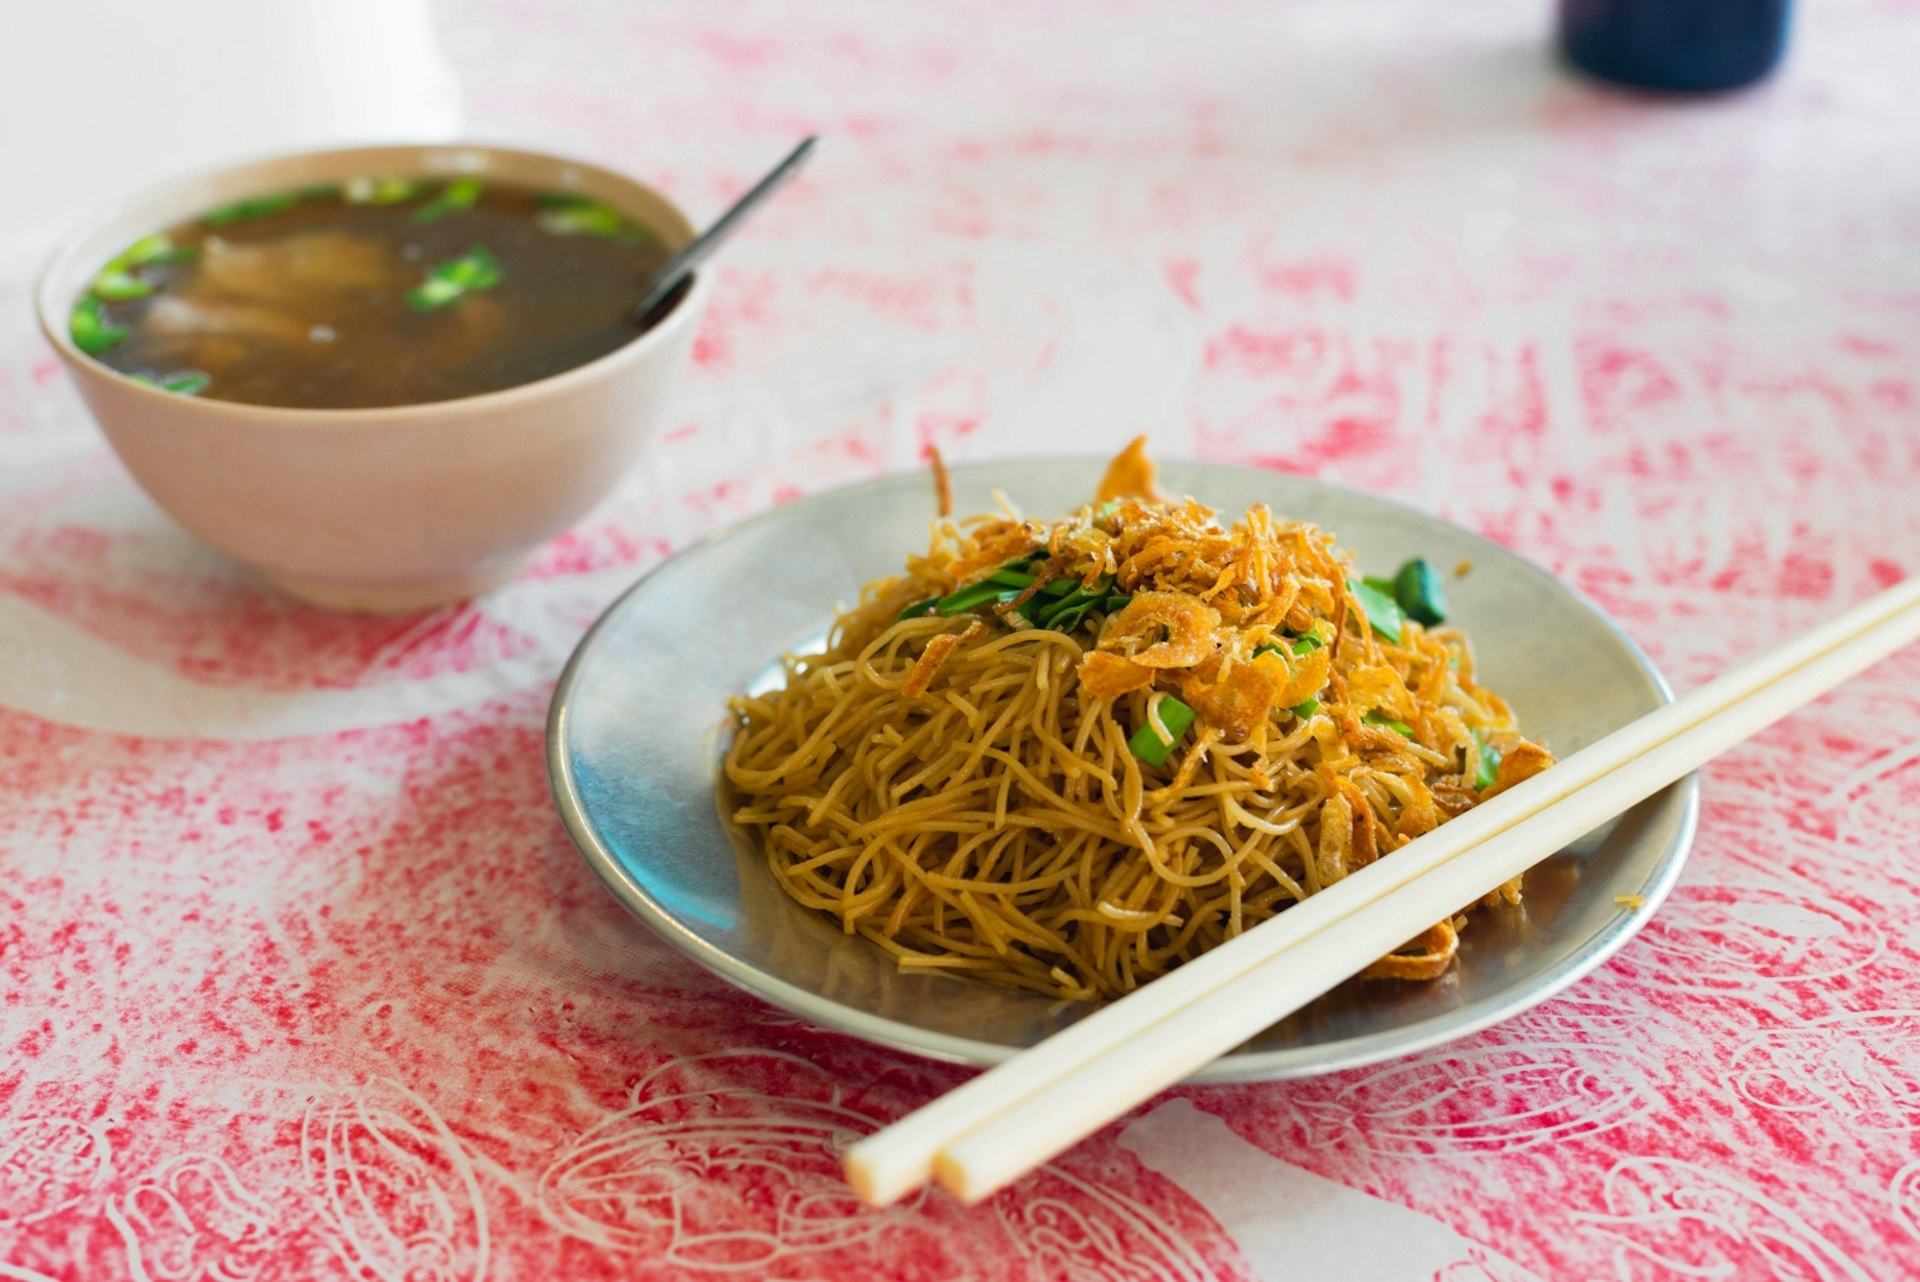 Mee hun, fried noodles in soy sauce served with pork broth, is said to have been invented on Phuket © Austin Bush / Lonely Planet